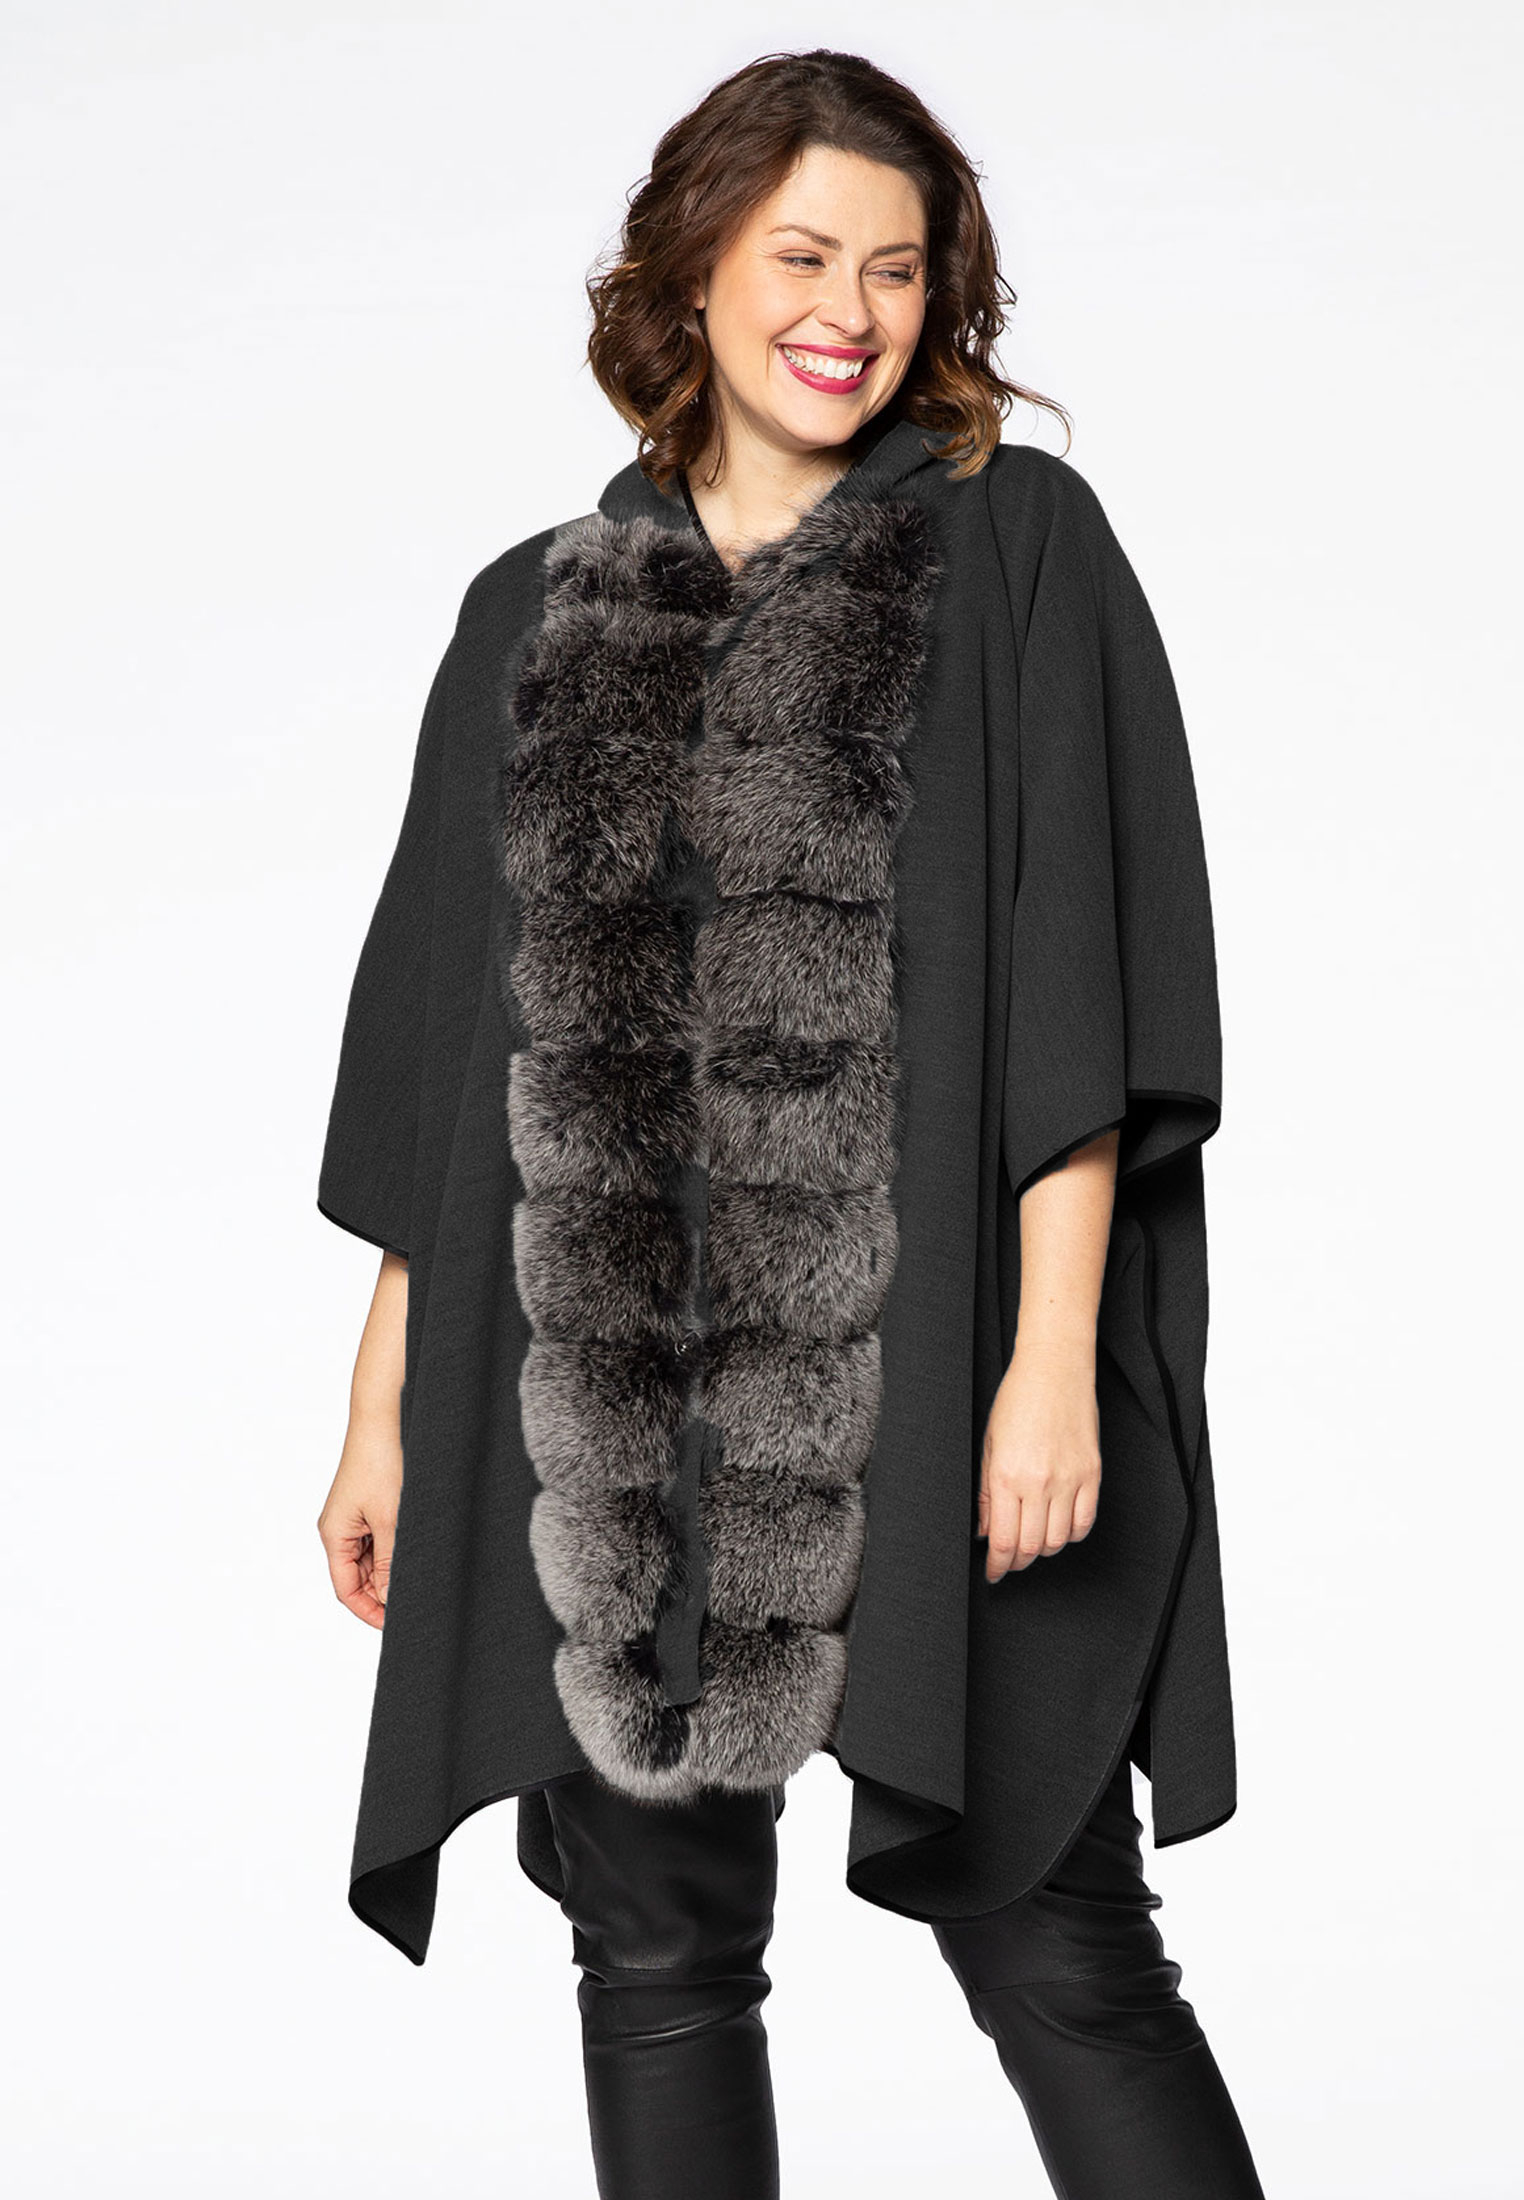 poncho with fur collar